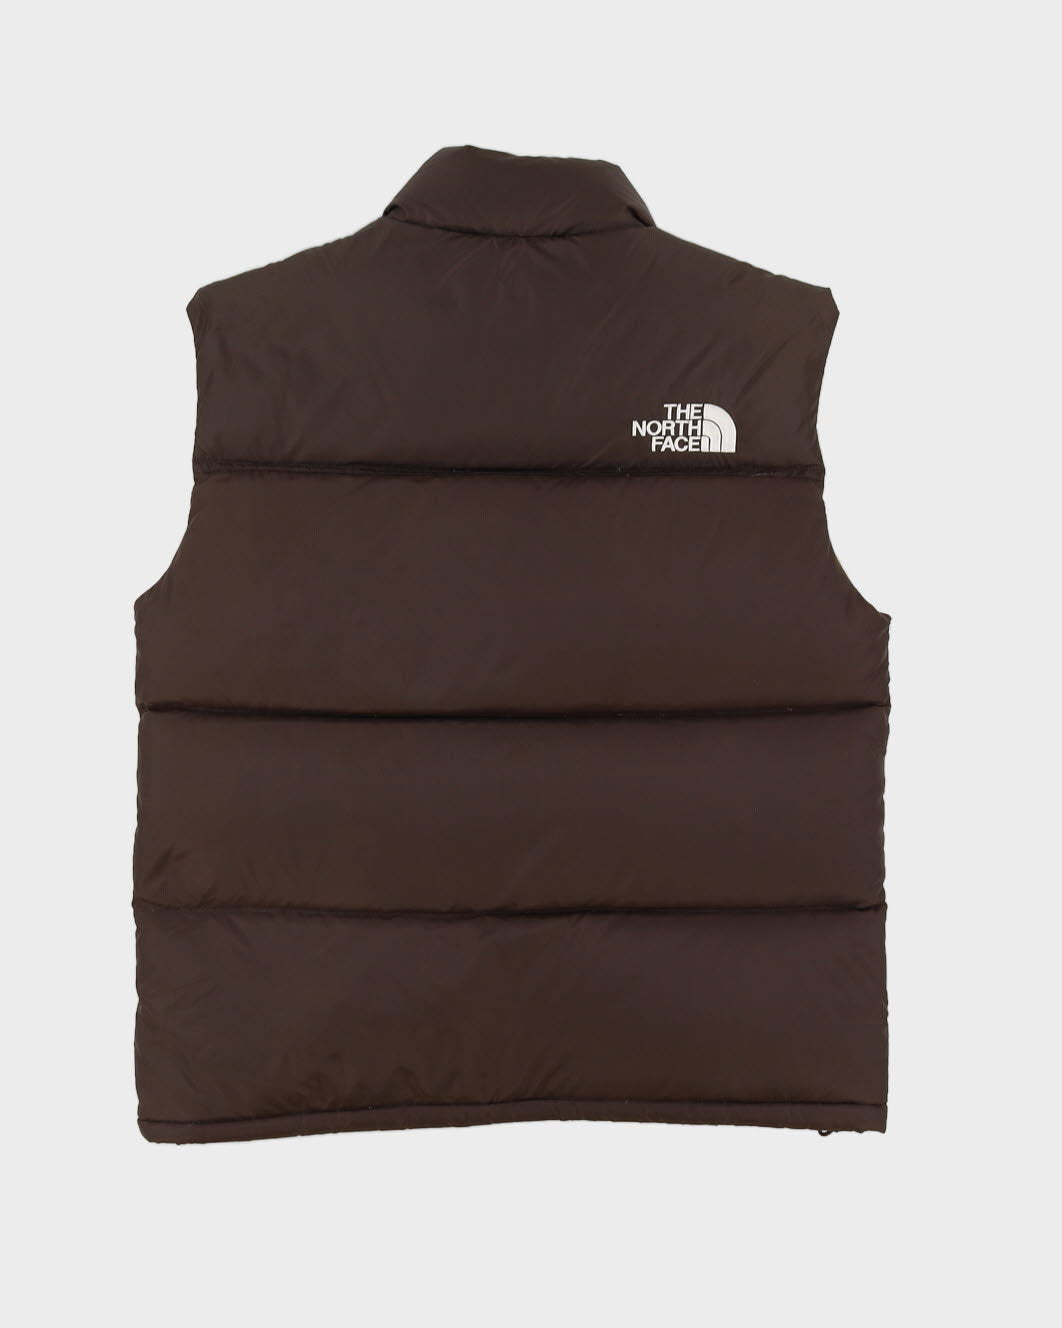 00s The North Face Brown 700 Puffer Gilet - M